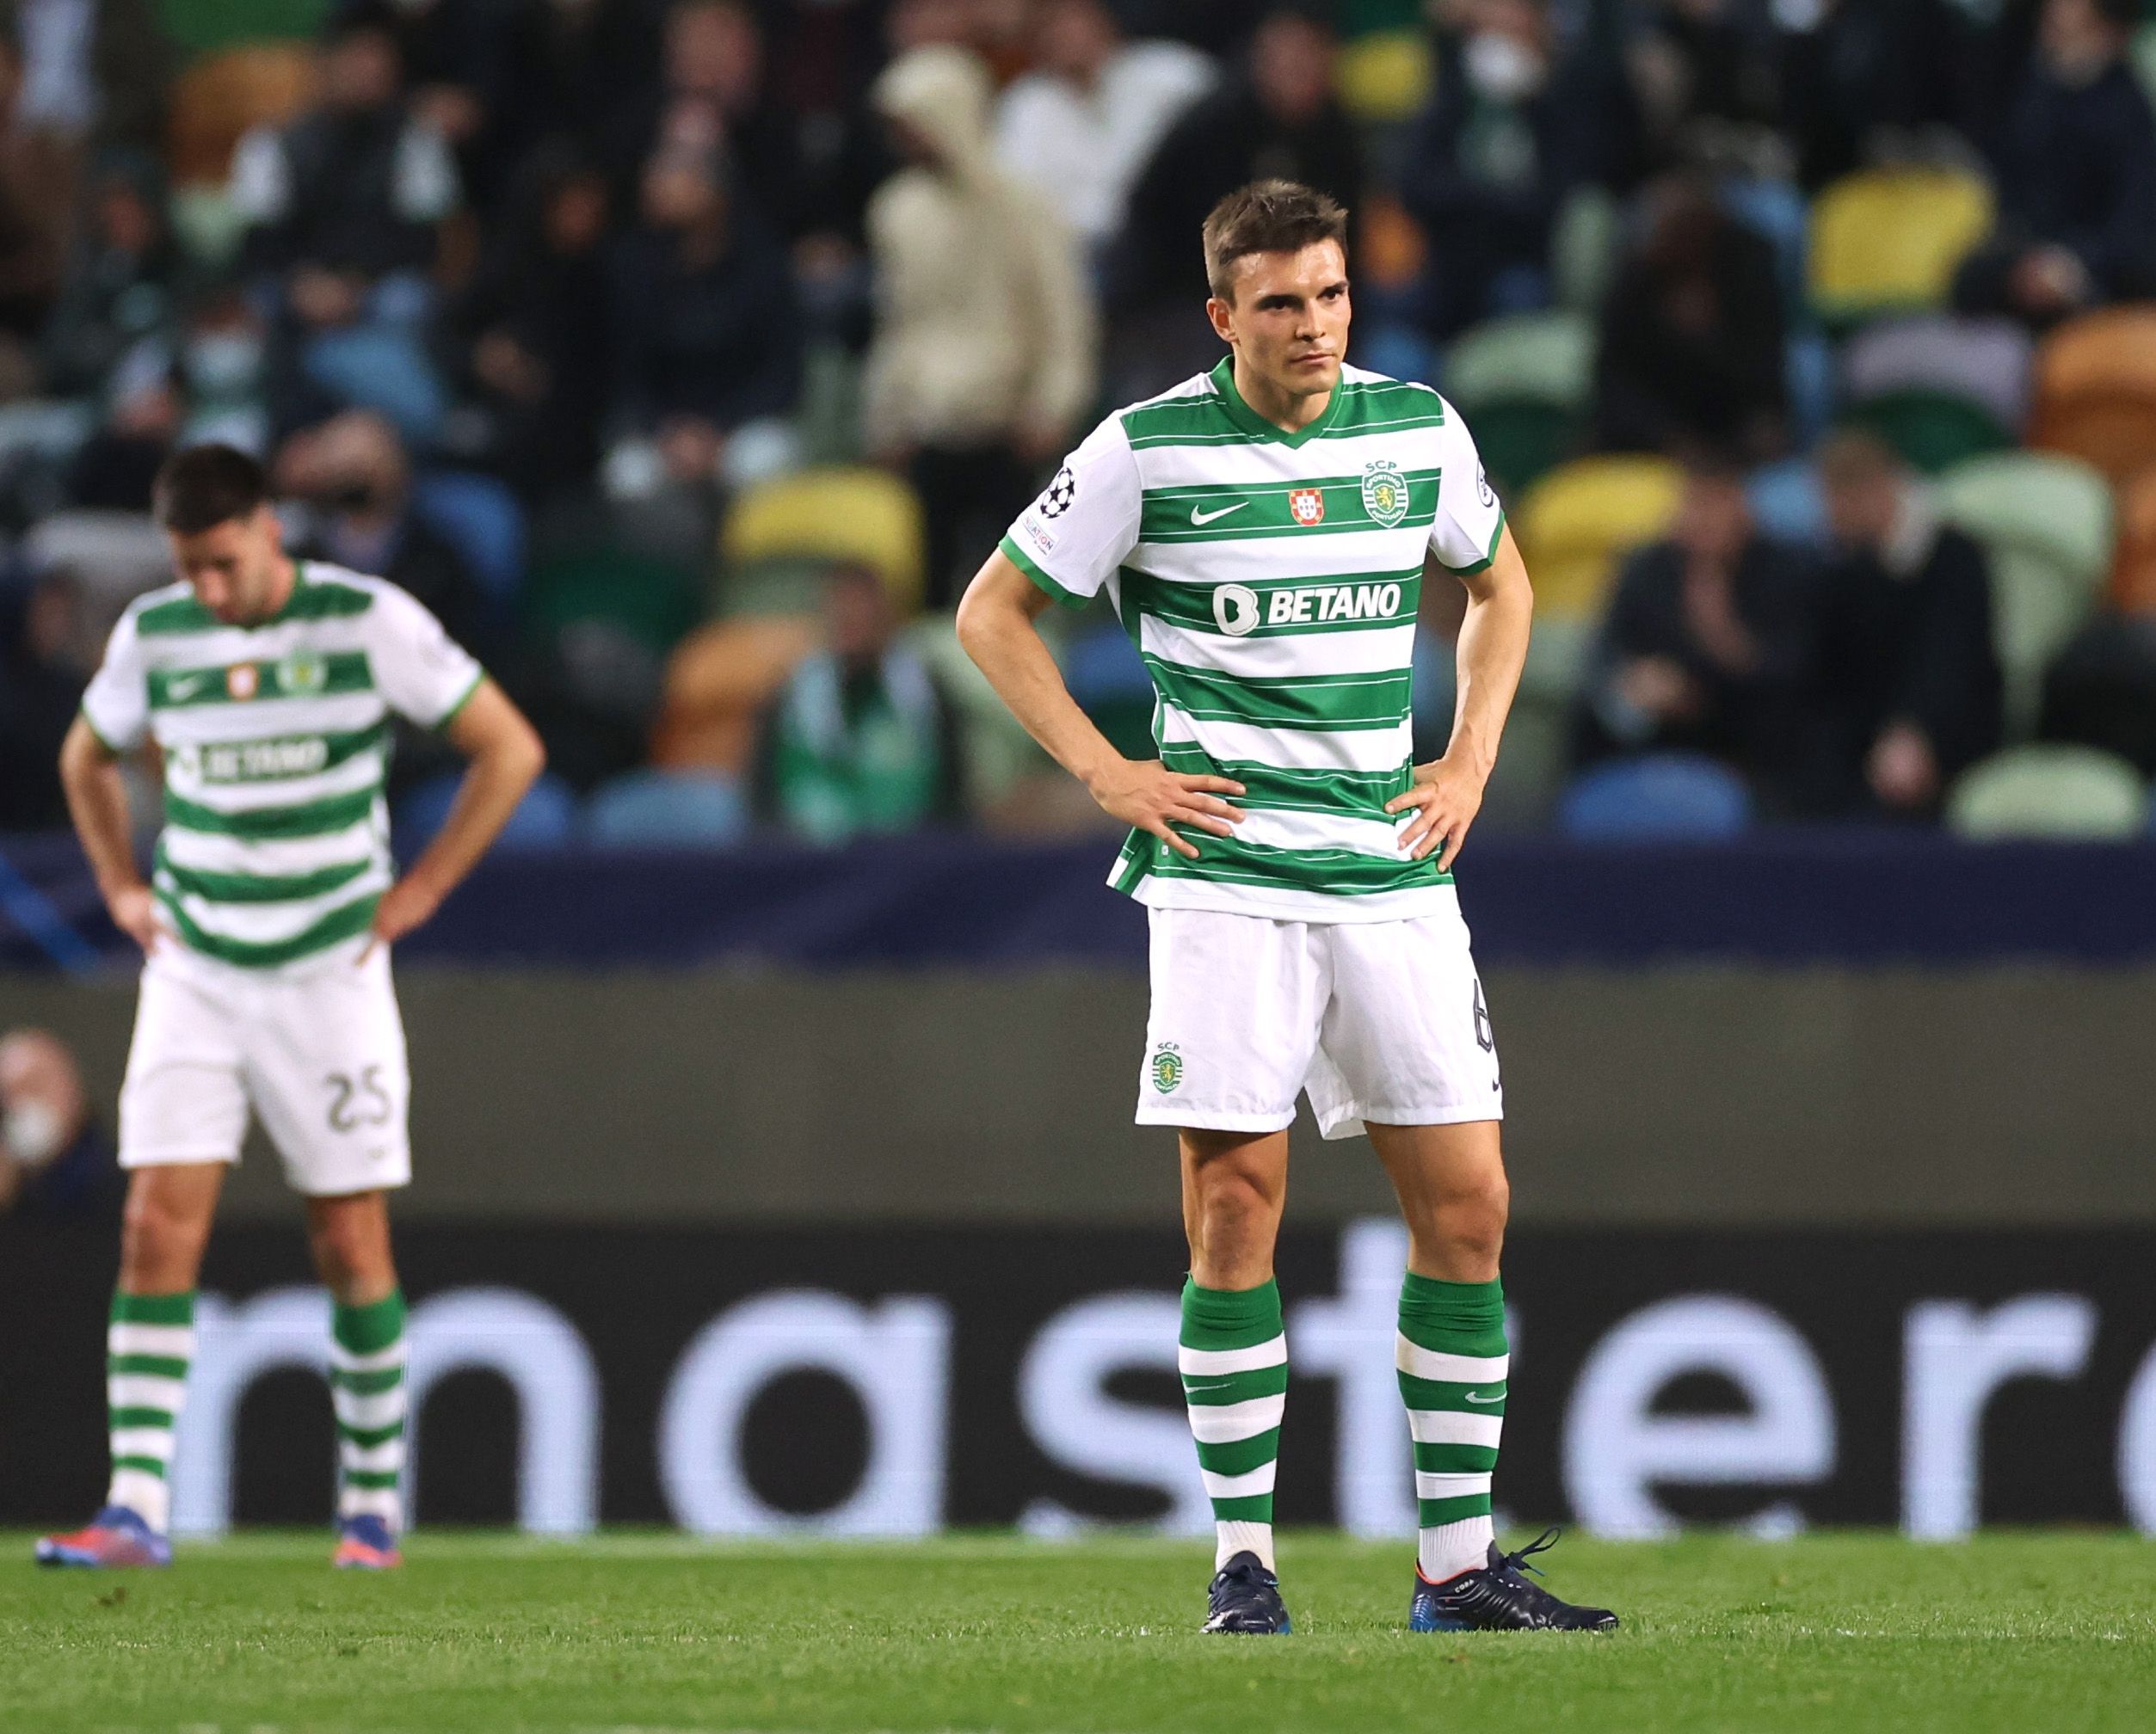 joao-palhinha-sporting-cp-manchester-city-champions-league-fulham-transfer-news-wolves-transfer-news-bruno-lage-jorge-mendes-agent-bruno-andradeSoccer Football - Champions League - Round of 16 First Leg - Sporting CP v Manchester City - Estadio Jose Alvalade, Lisbon, Portugal - February 15, 2022
Sporting CP's Joao Palhinha looks dejected after Manchester City's Bernardo Silva scores their fourth goal Action Images via Reuters/Carl Recine